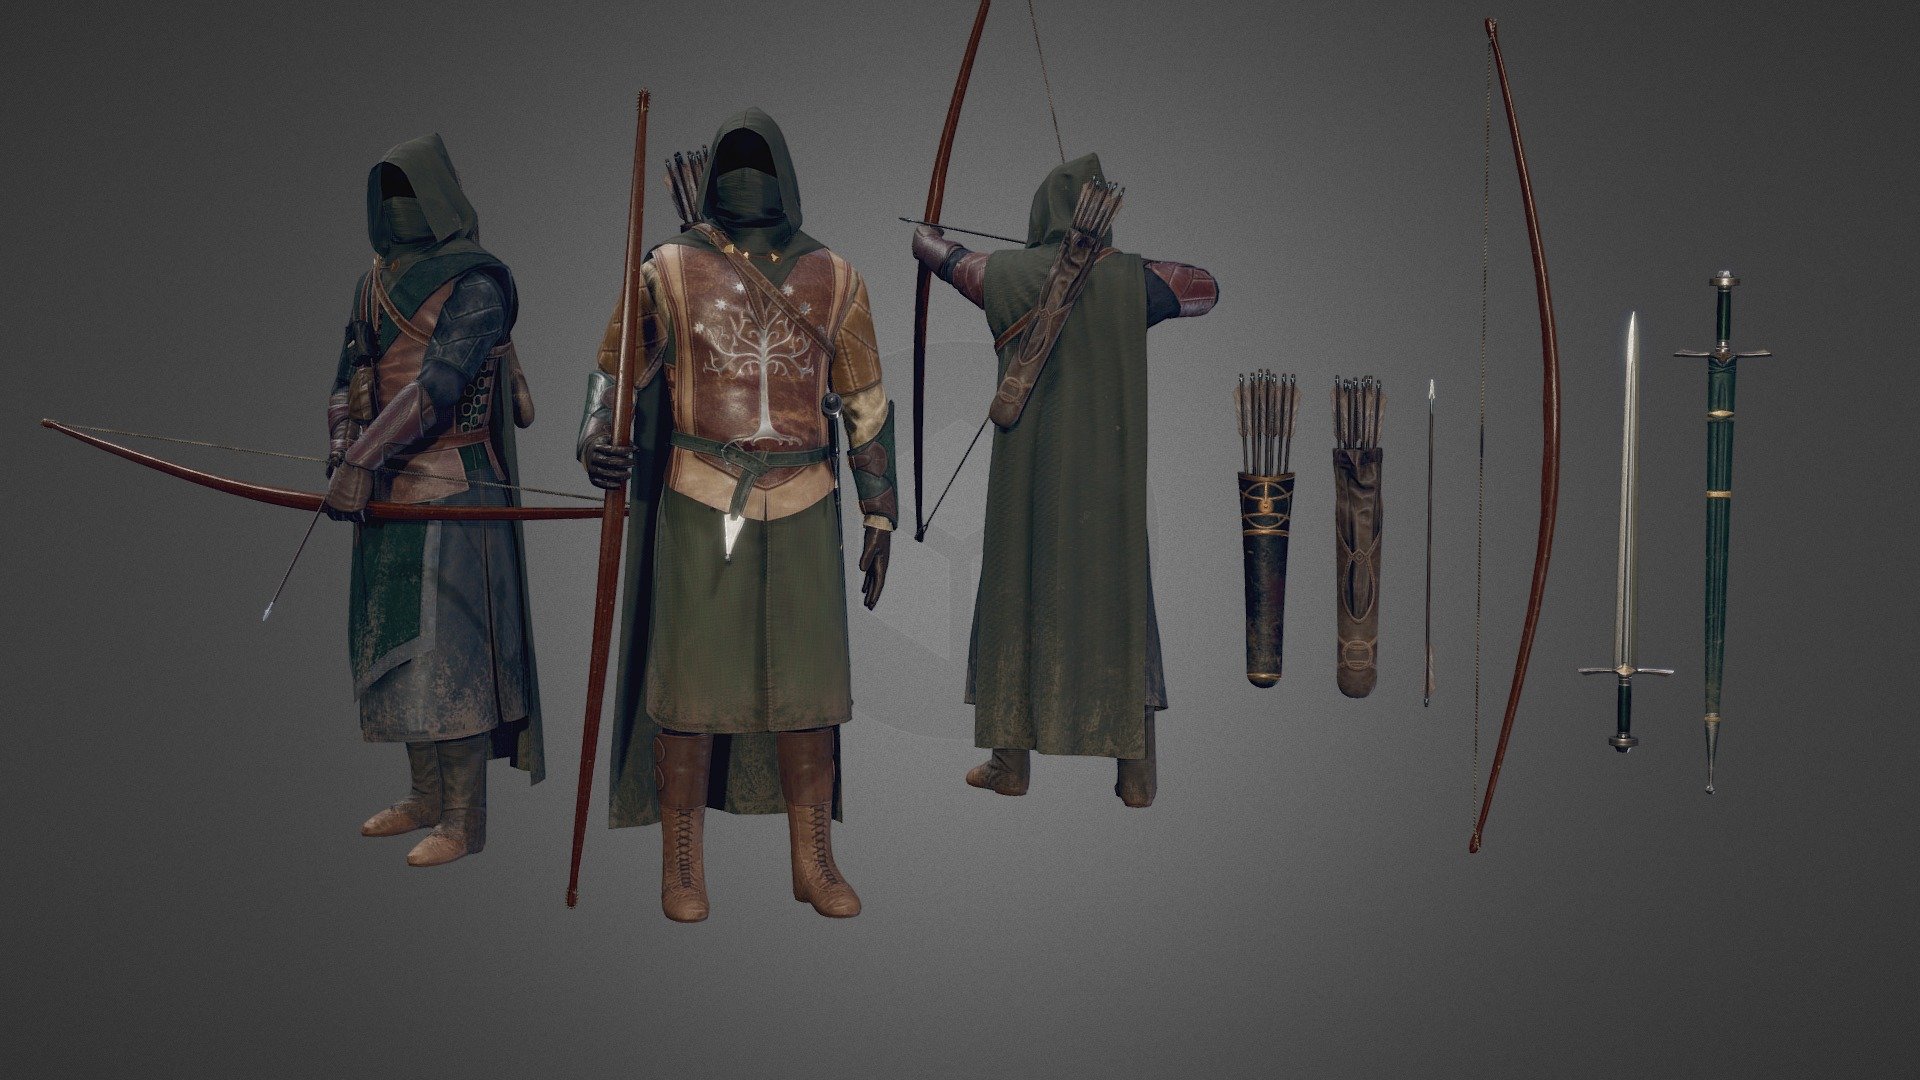 Ithilien Rangers from The Lord of the Rings trilogy, based on Weta design. Made for the Kingdoms of Arda - Mount &amp; Blade II: Bannerlord mod.
https://www.moddb.com/mods/a-lord-of-the-rings-mod-kingdoms-of-arda

It includes outfits for Faramir, captiain of Gondor and leader of Ithilien rangers, and for 2 common rangers. Plus quivers and weapons such as Ithilien (Gondor) longbow and uniqe Faramir's sword 3d model